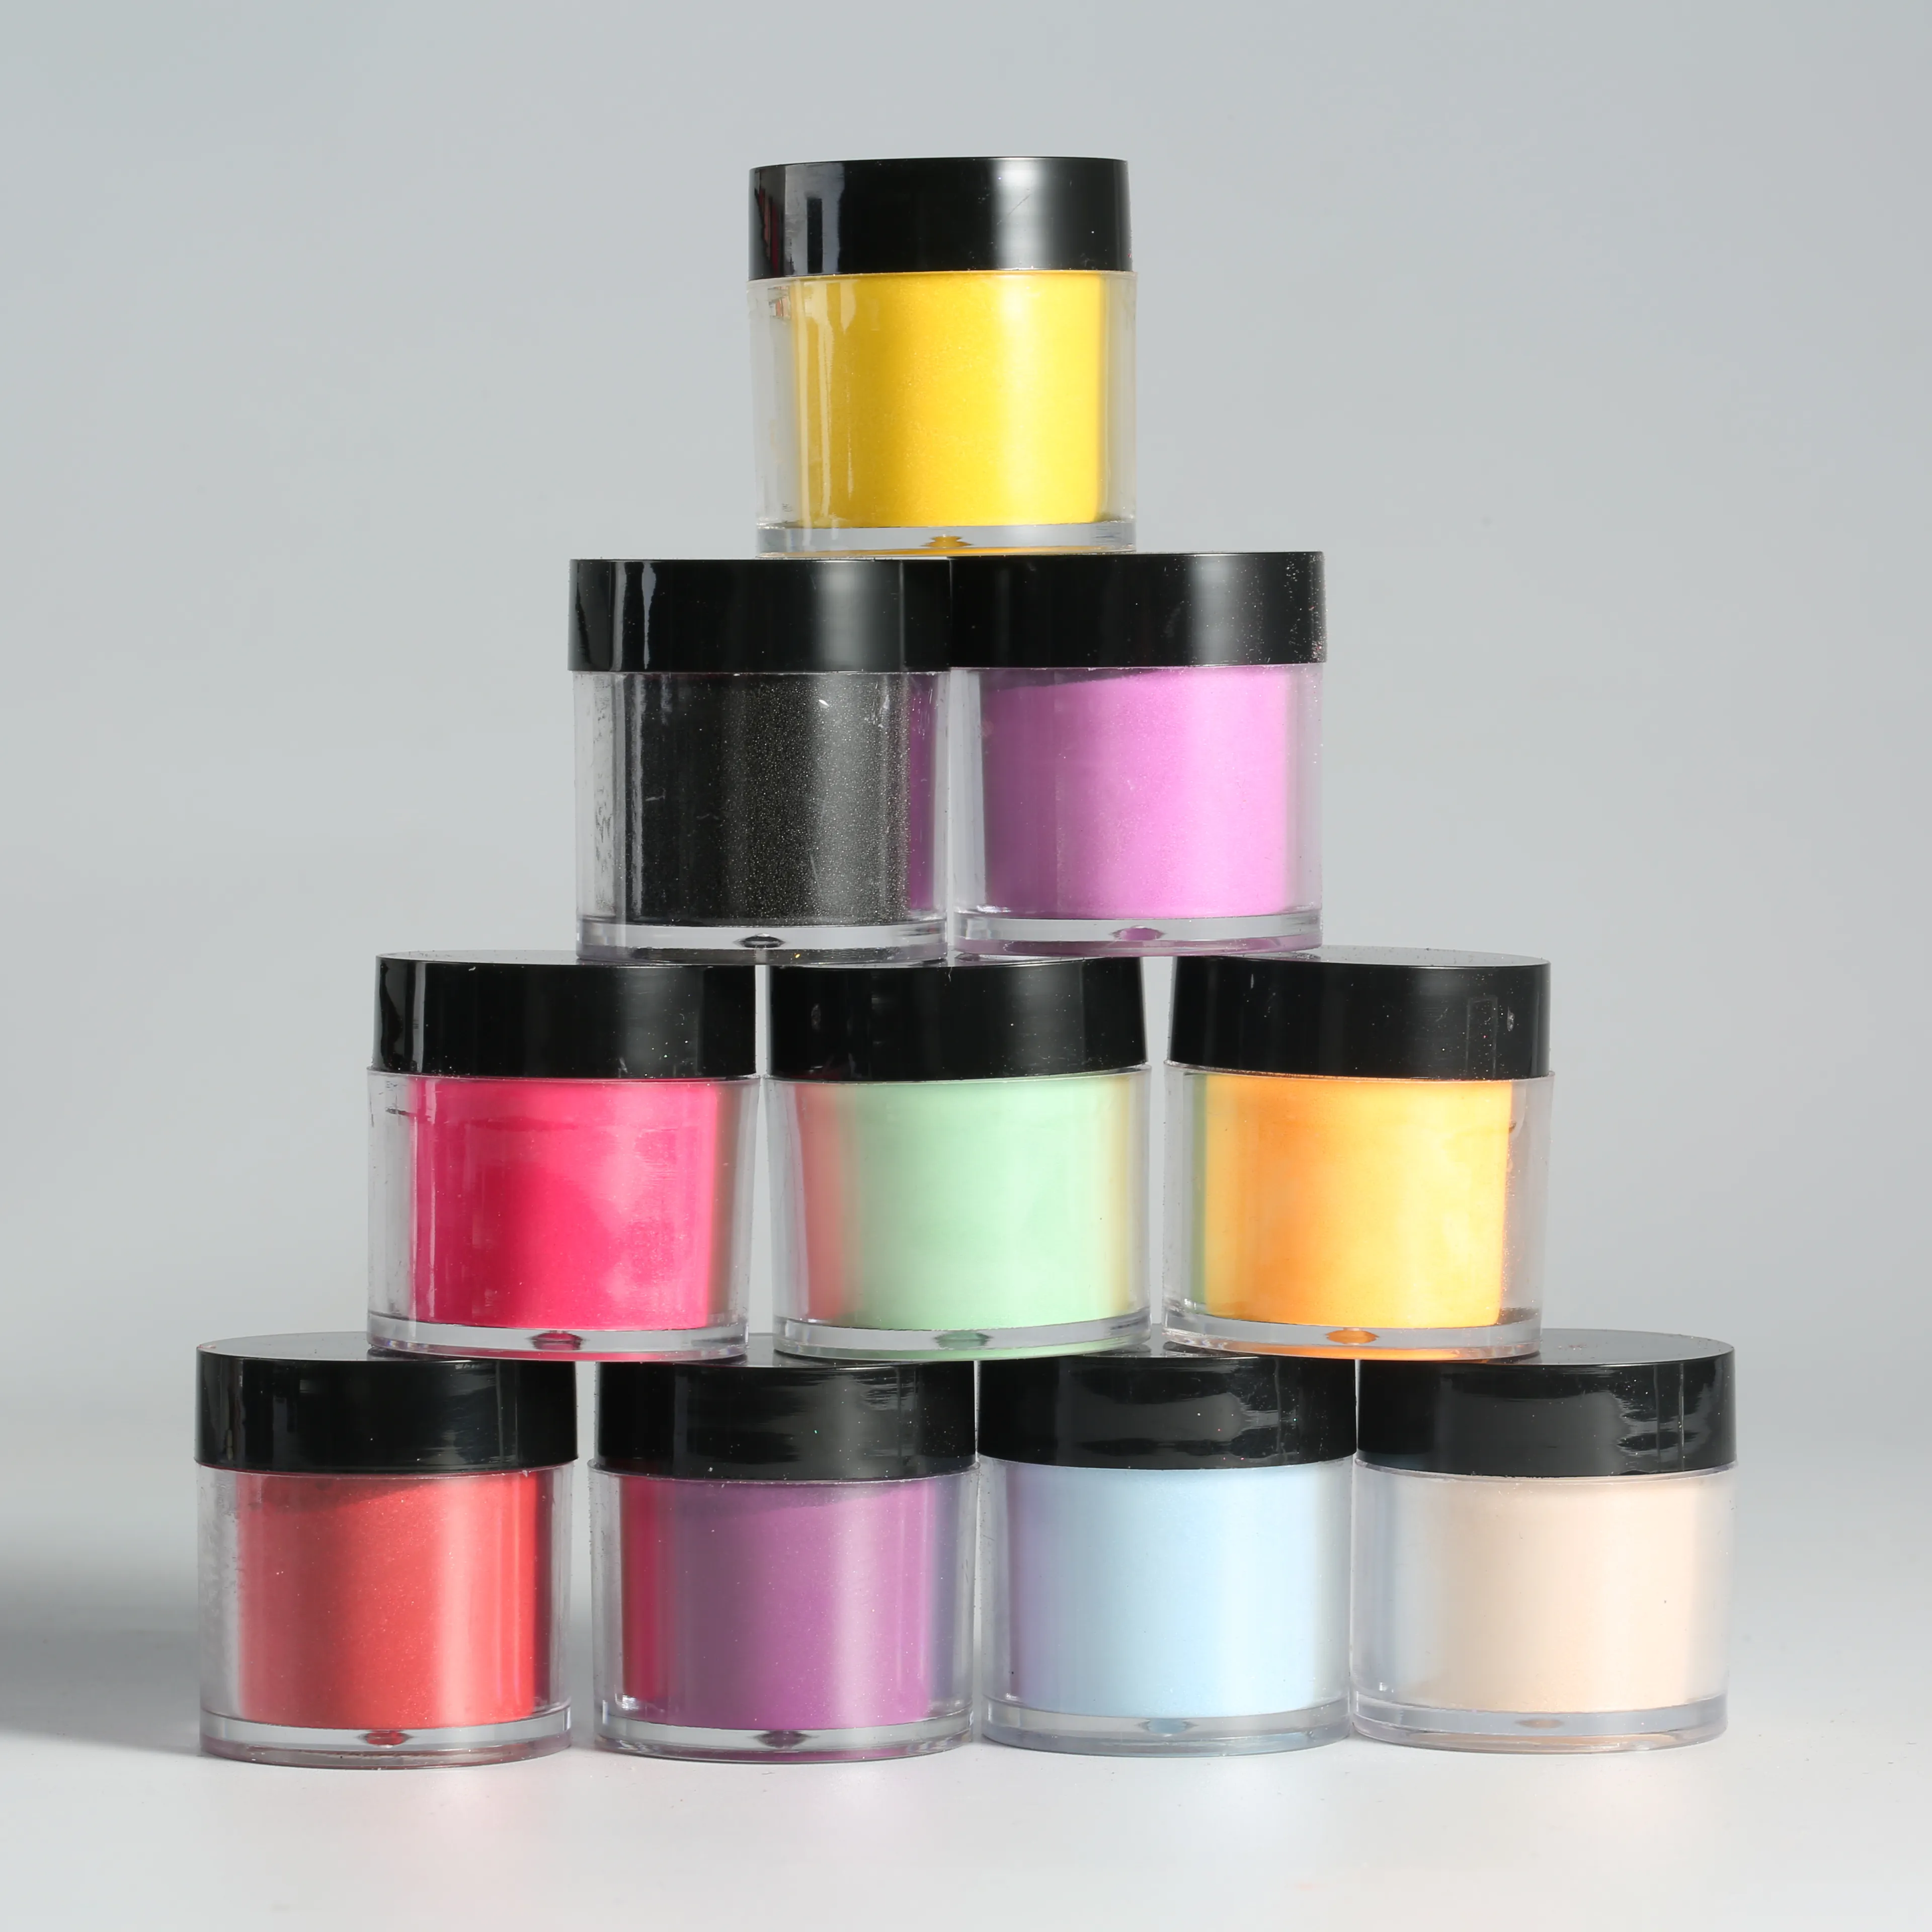 Fast Dry Promote Delivery Price 3 in 1 Acrylic Nails Powder Blue Grown Green Yellow 10g Acrylic Jar Dipping Powder